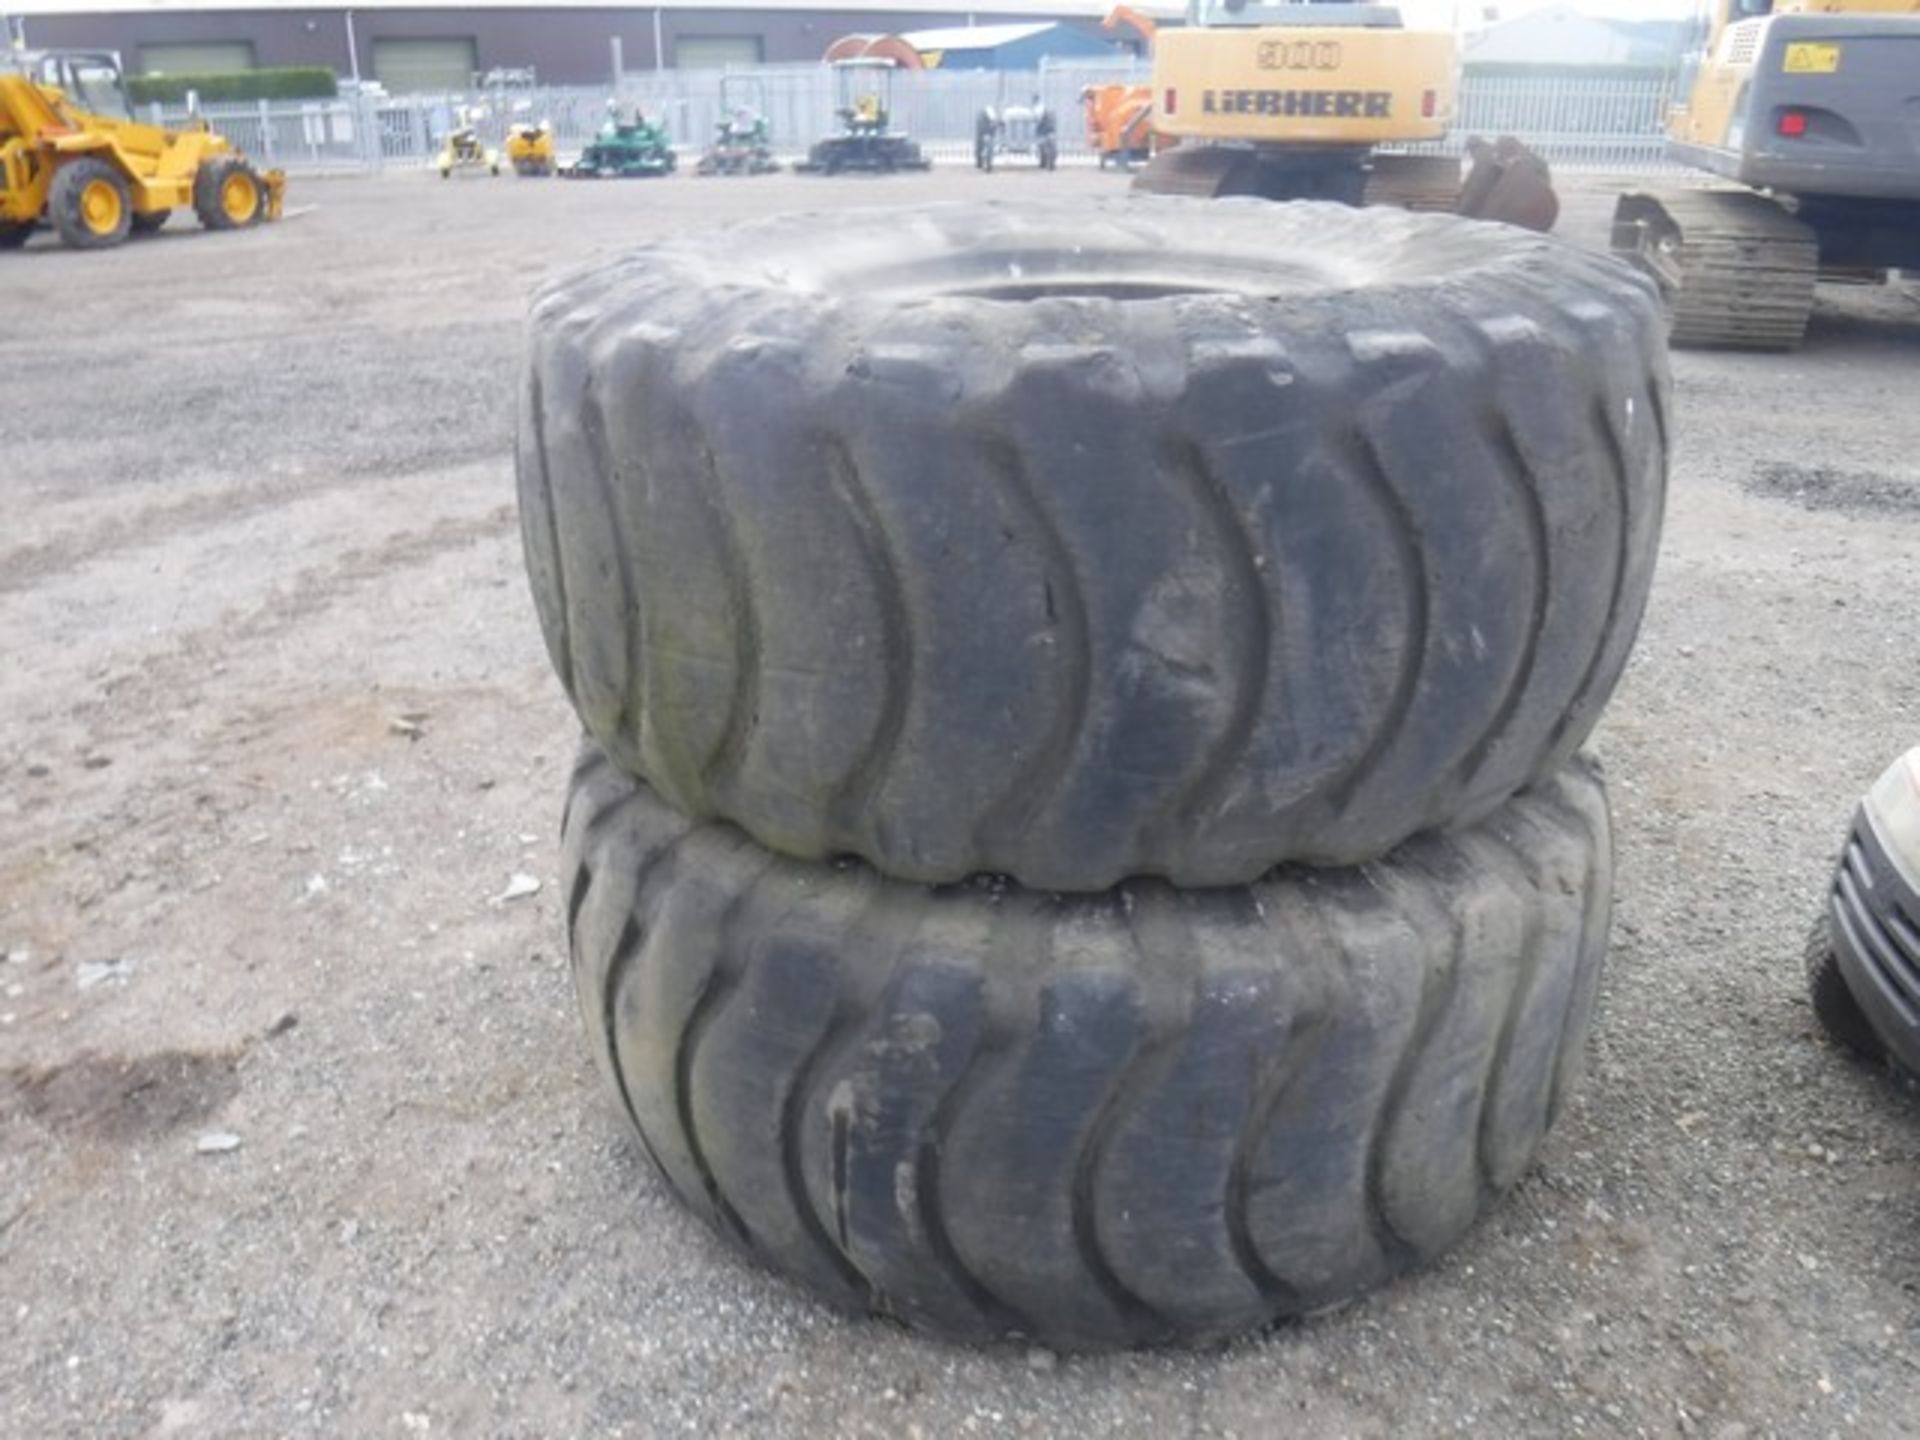 MICHELIN TYRES x2 -- 26.5x25 SUITABLE FOR WHEEL SHOVEL OR SIMILAR